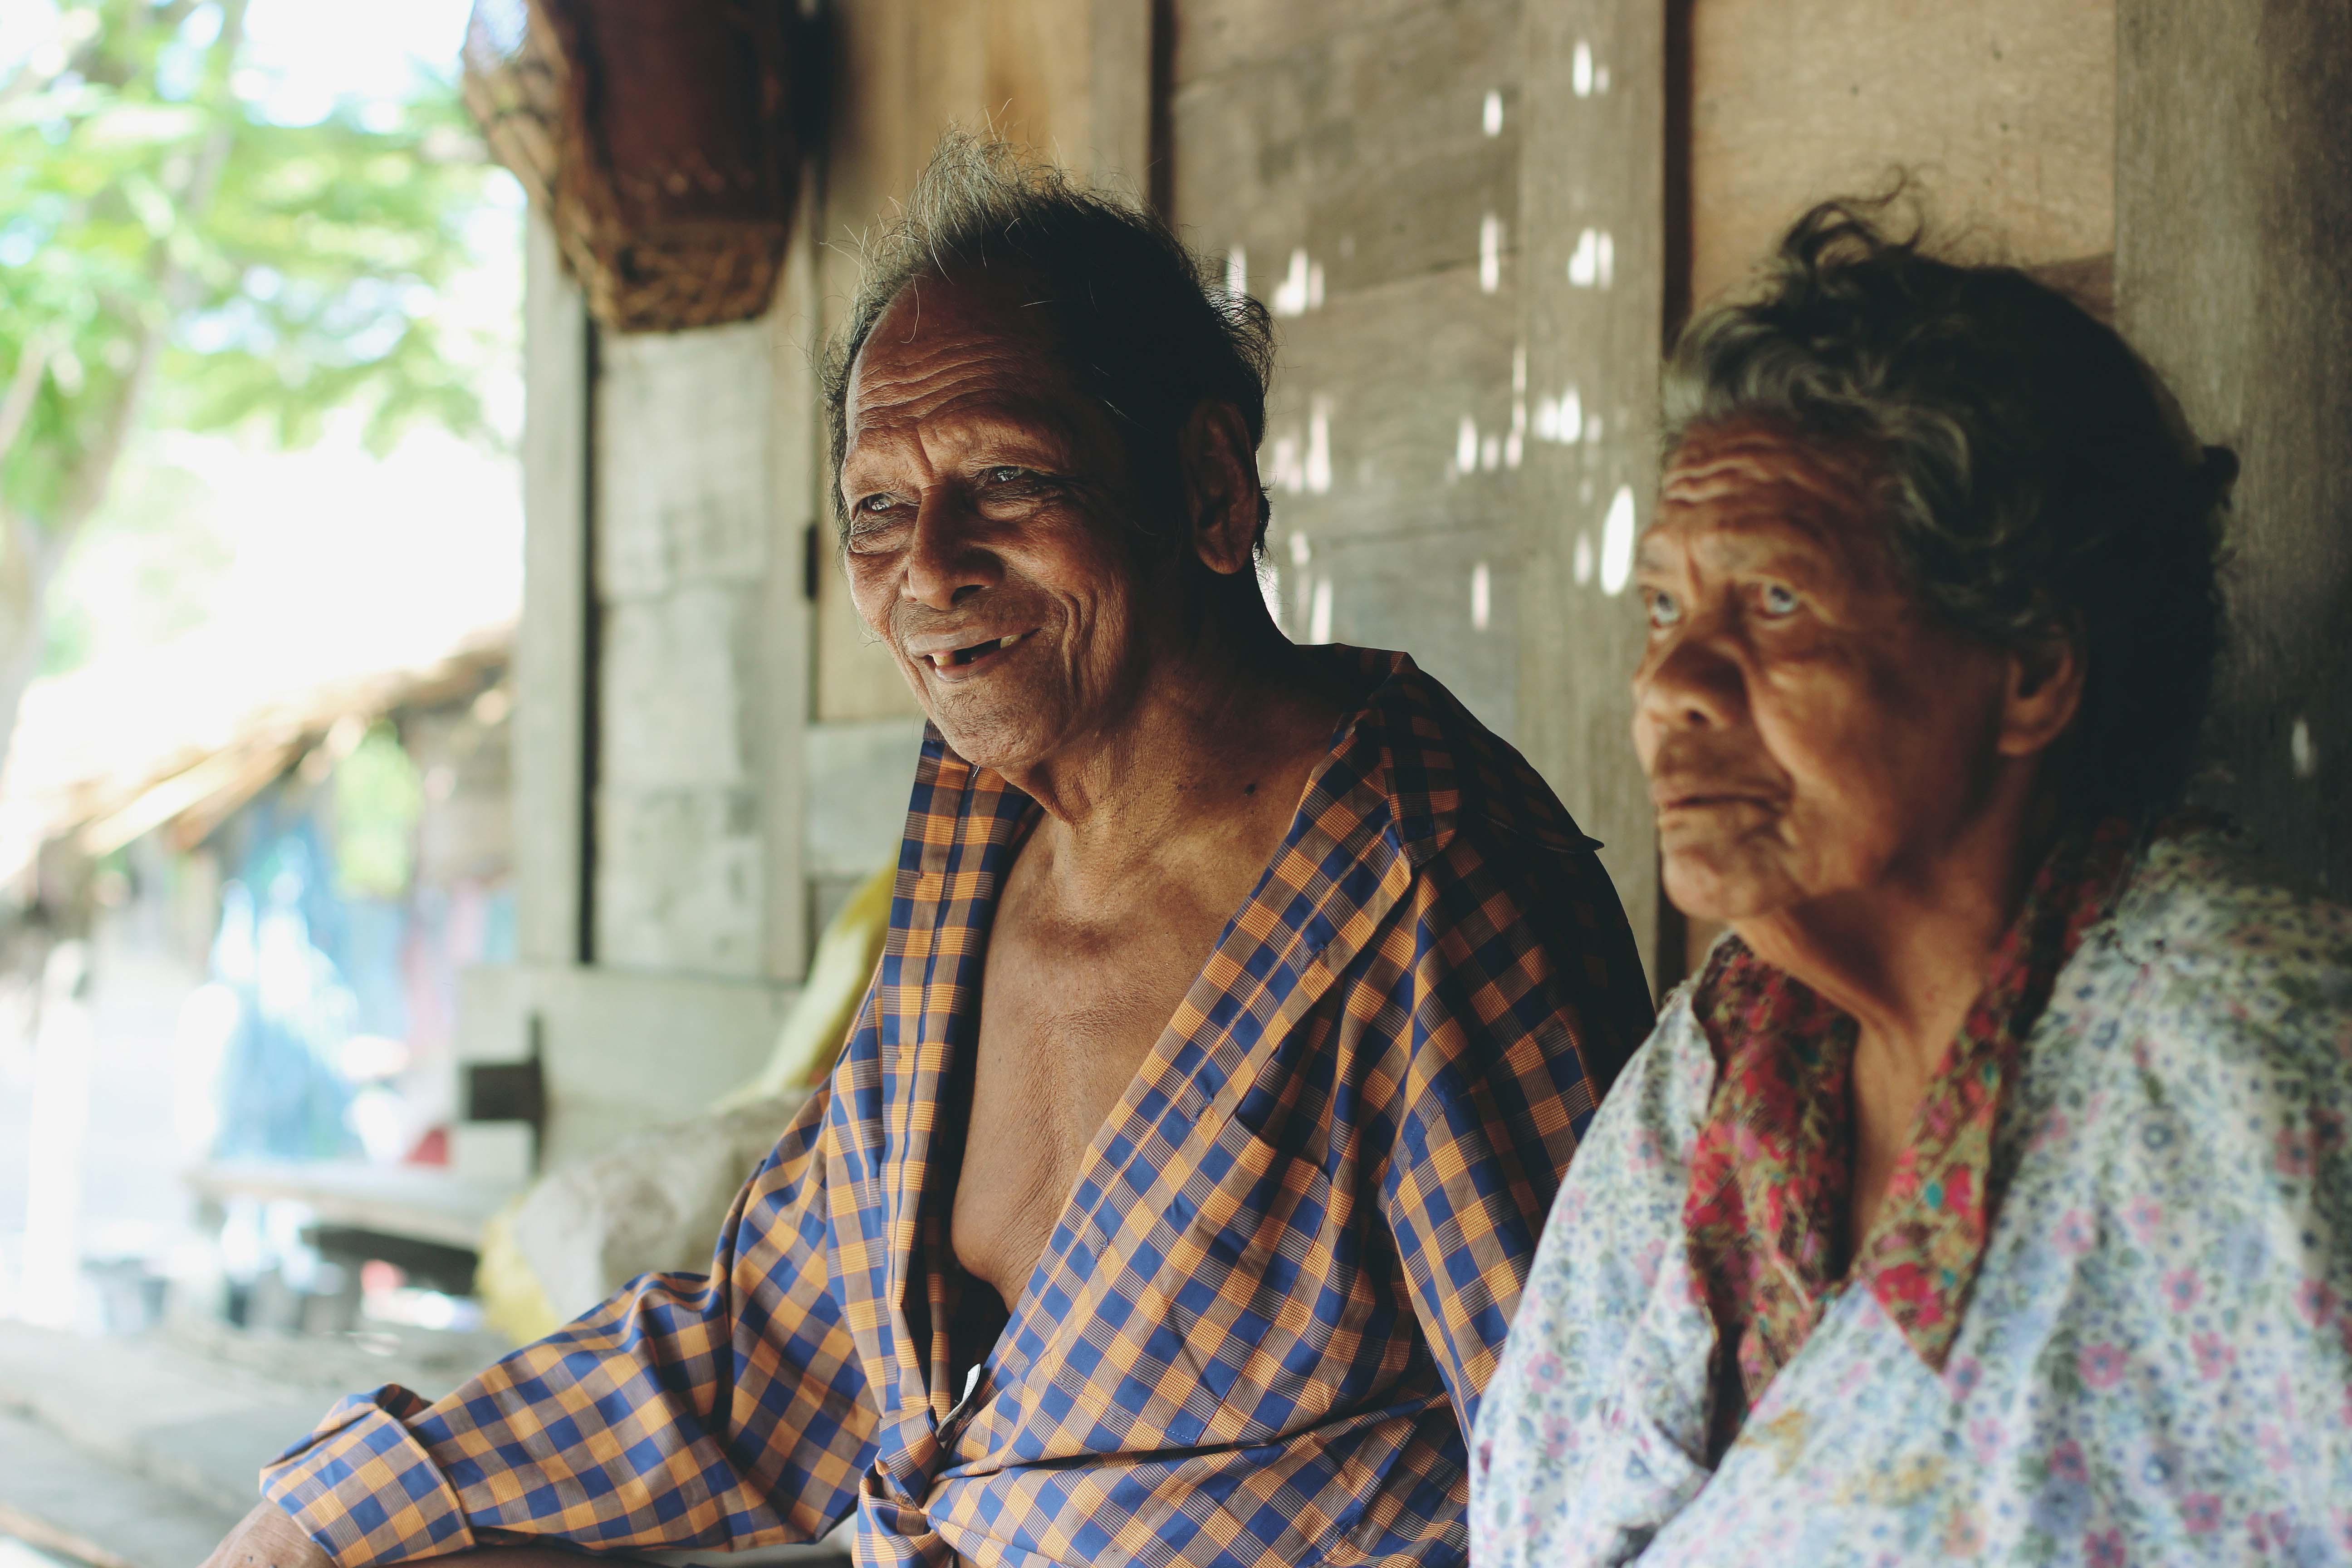 Grandfather and grandmother, two elders of the upper village, sit on the front porch of the house they were born in. The upper village is built on a hill that was traditionally only accessible by wooder ladders. Only a few traditional houses, made of wood and palm tree leaves, remain. Beliefs are deeply rooted within the spatial organisation of the village itself, with spaces devoted to the spirit world, often at the back of the house, where speech and other worldly activities become taboo.